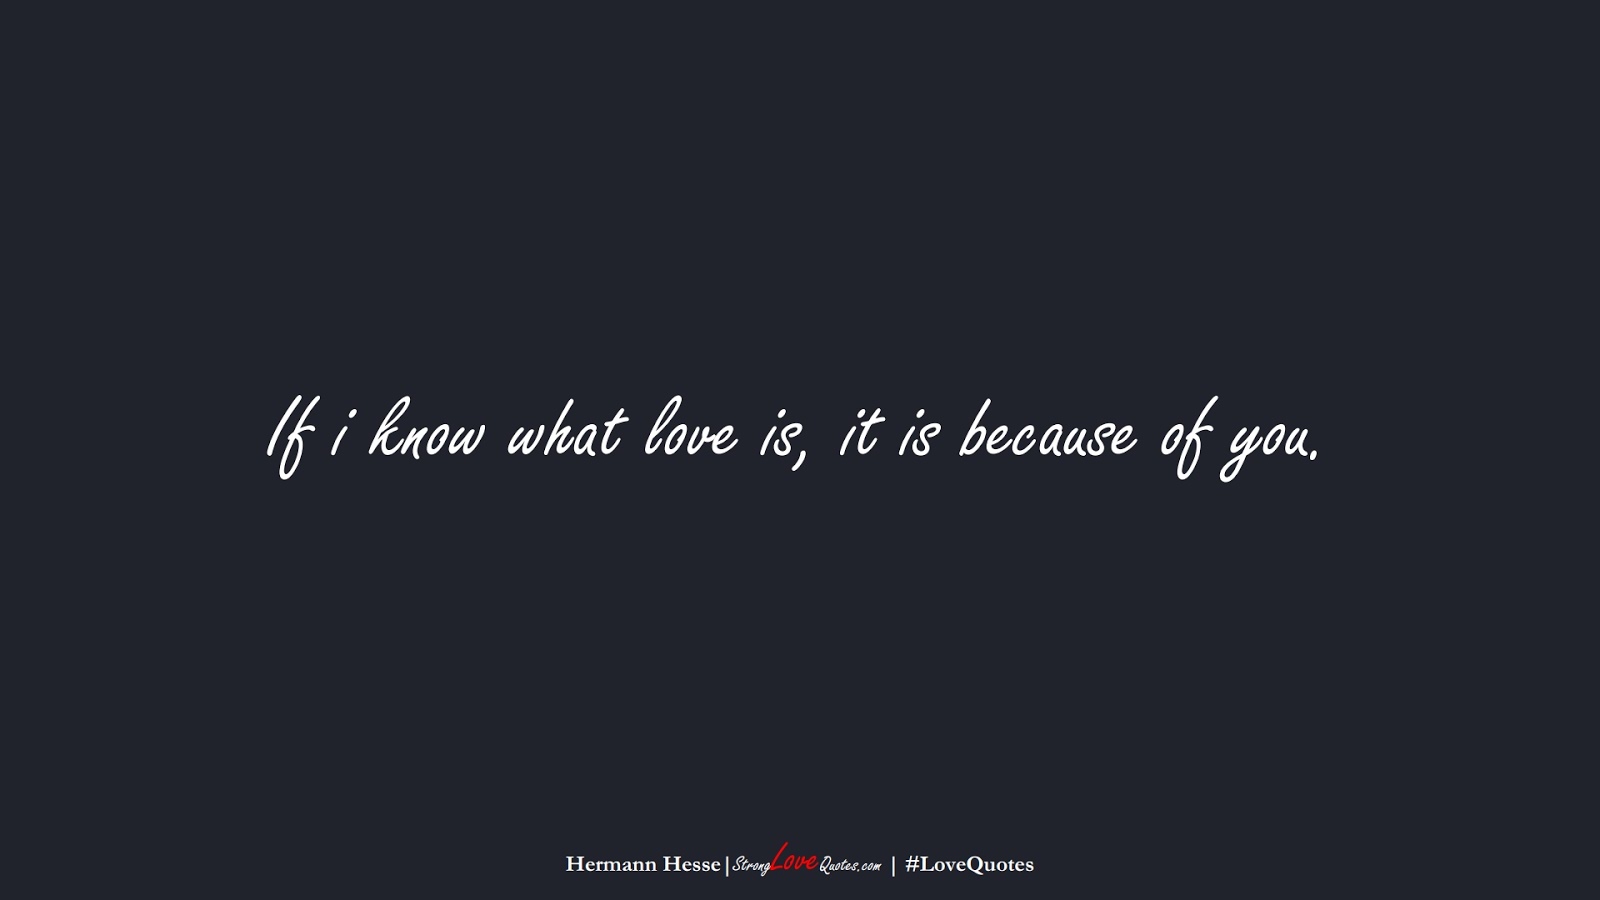 If i know what love is, it is because of you. (Hermann Hesse);  #LoveQuotes